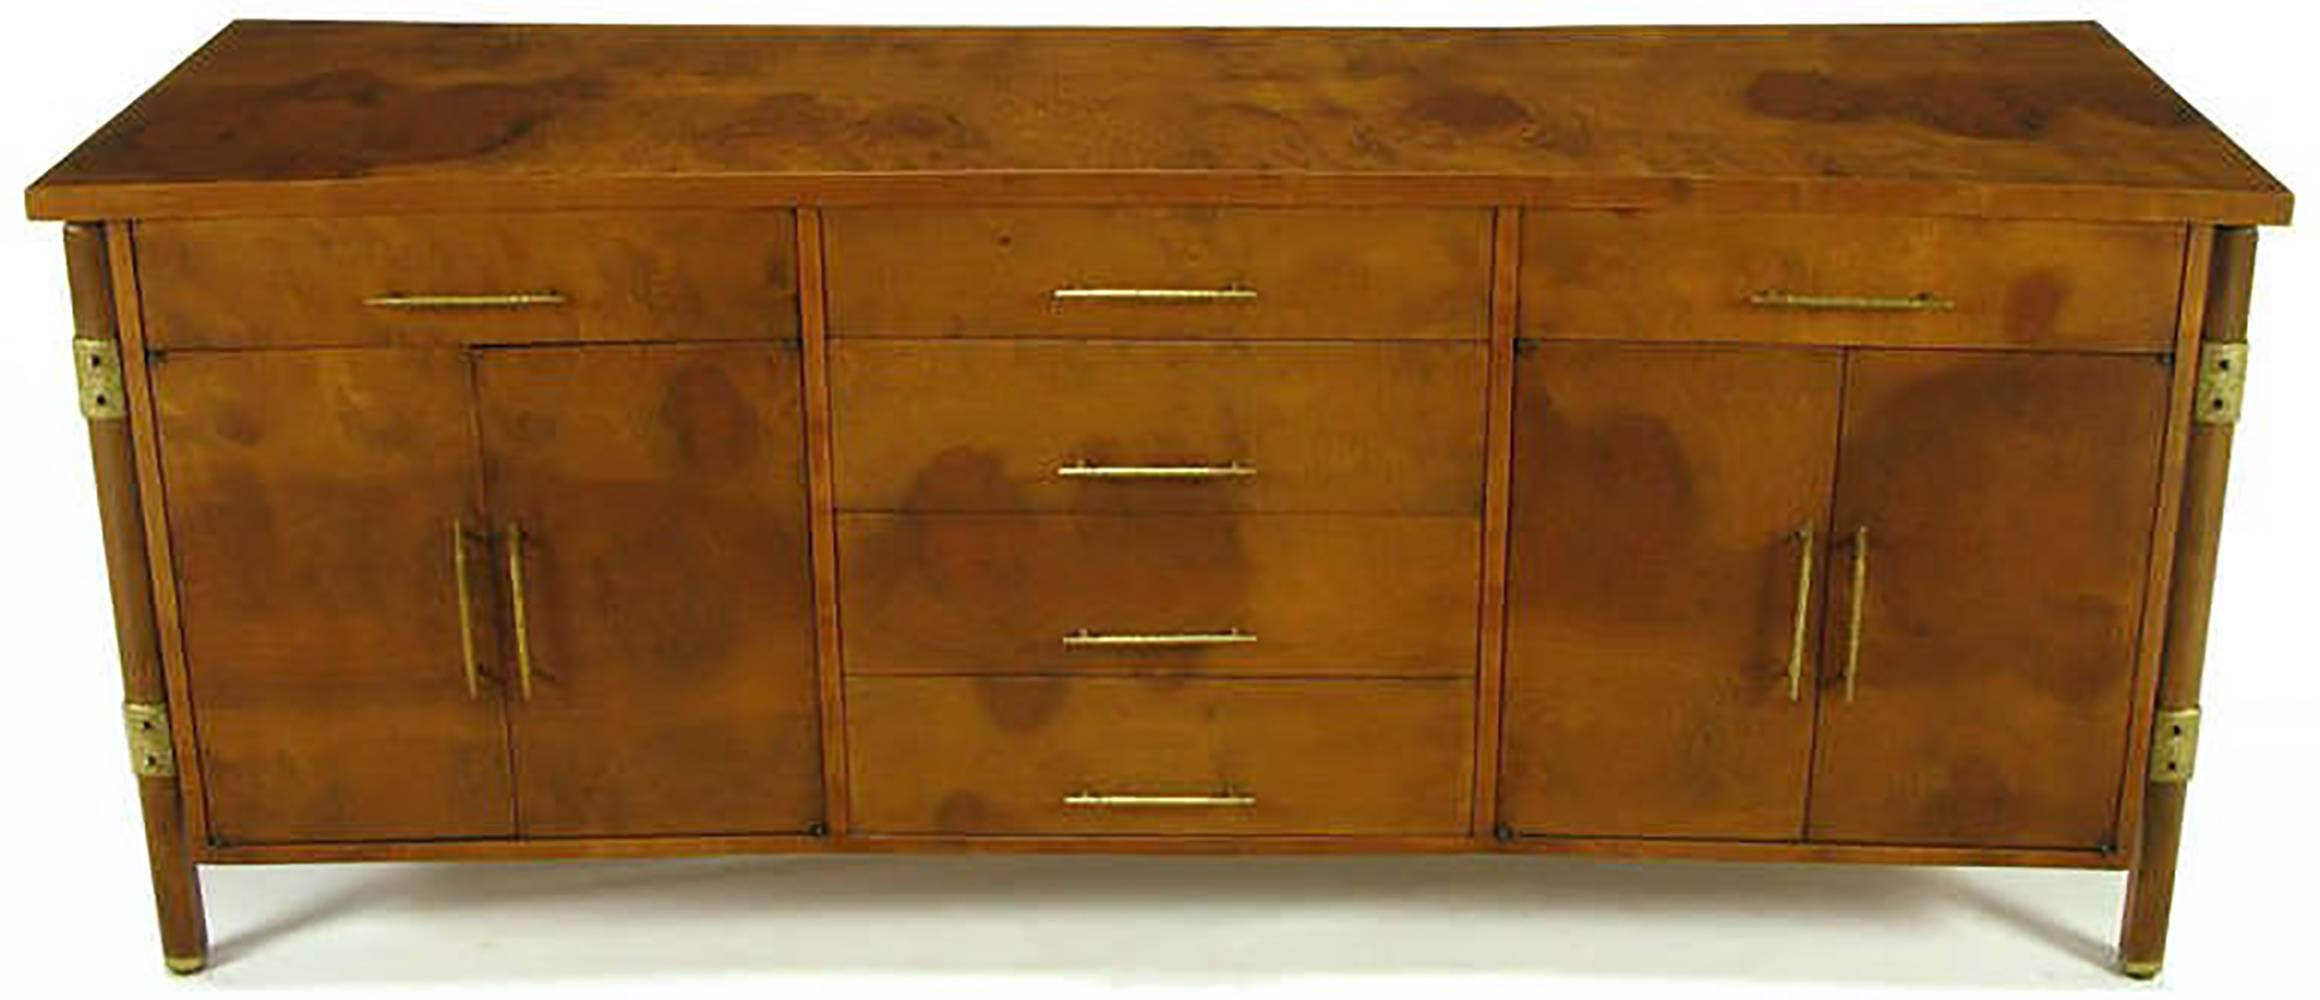 Mid-20th Century Rare Harold Schwartz Romweber Sideboard With Floating Cabinet